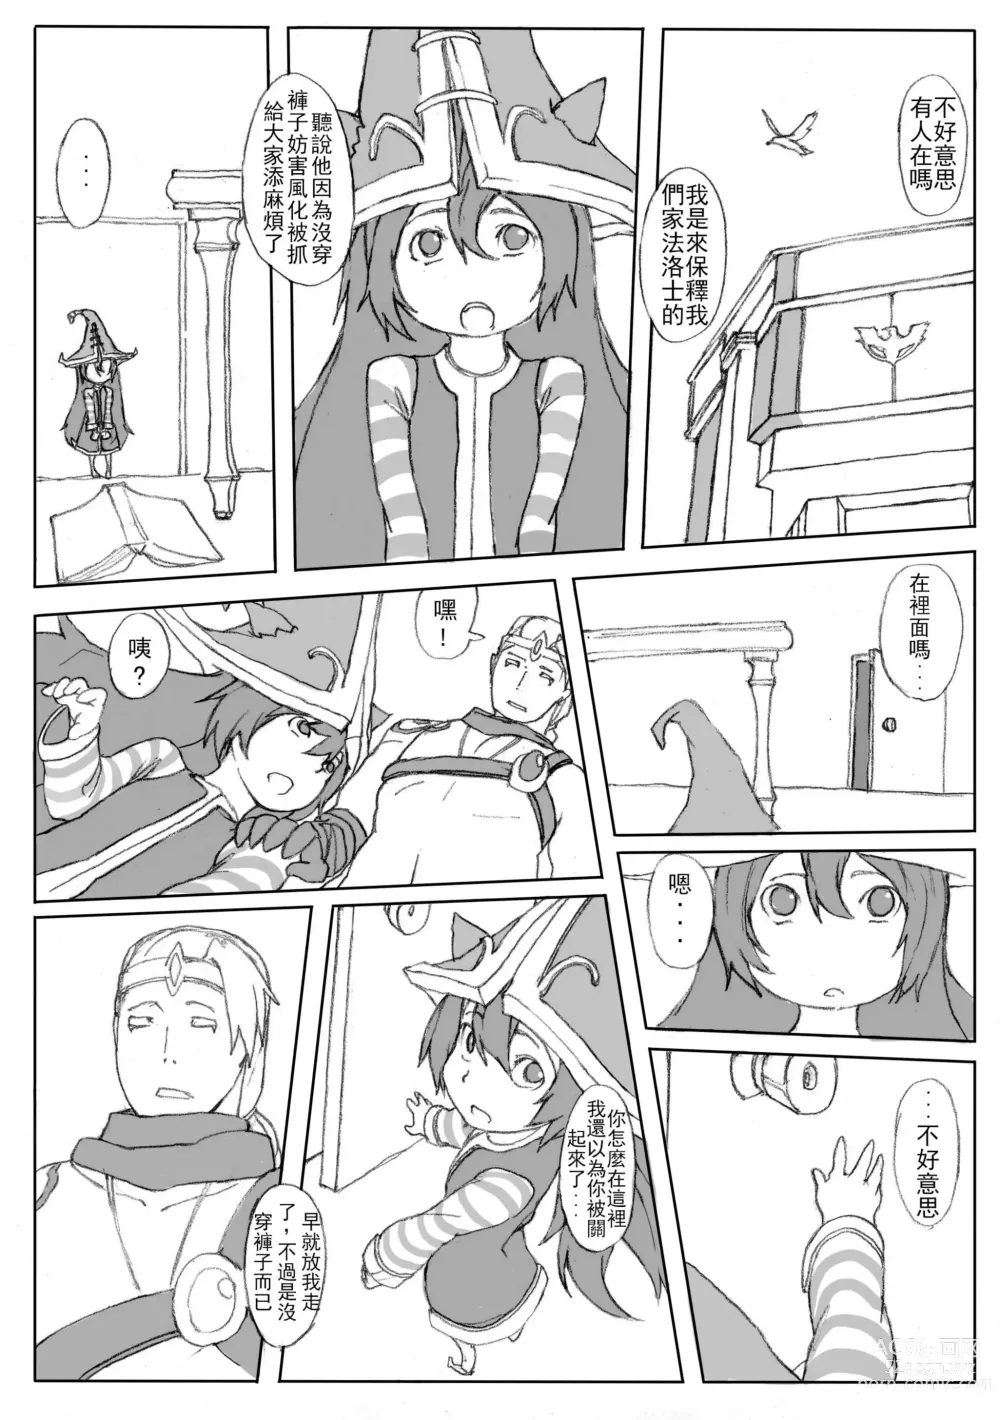 Page 19 of doujinshi 凱特琳壞壞 (League of Legends) [無修正]中文